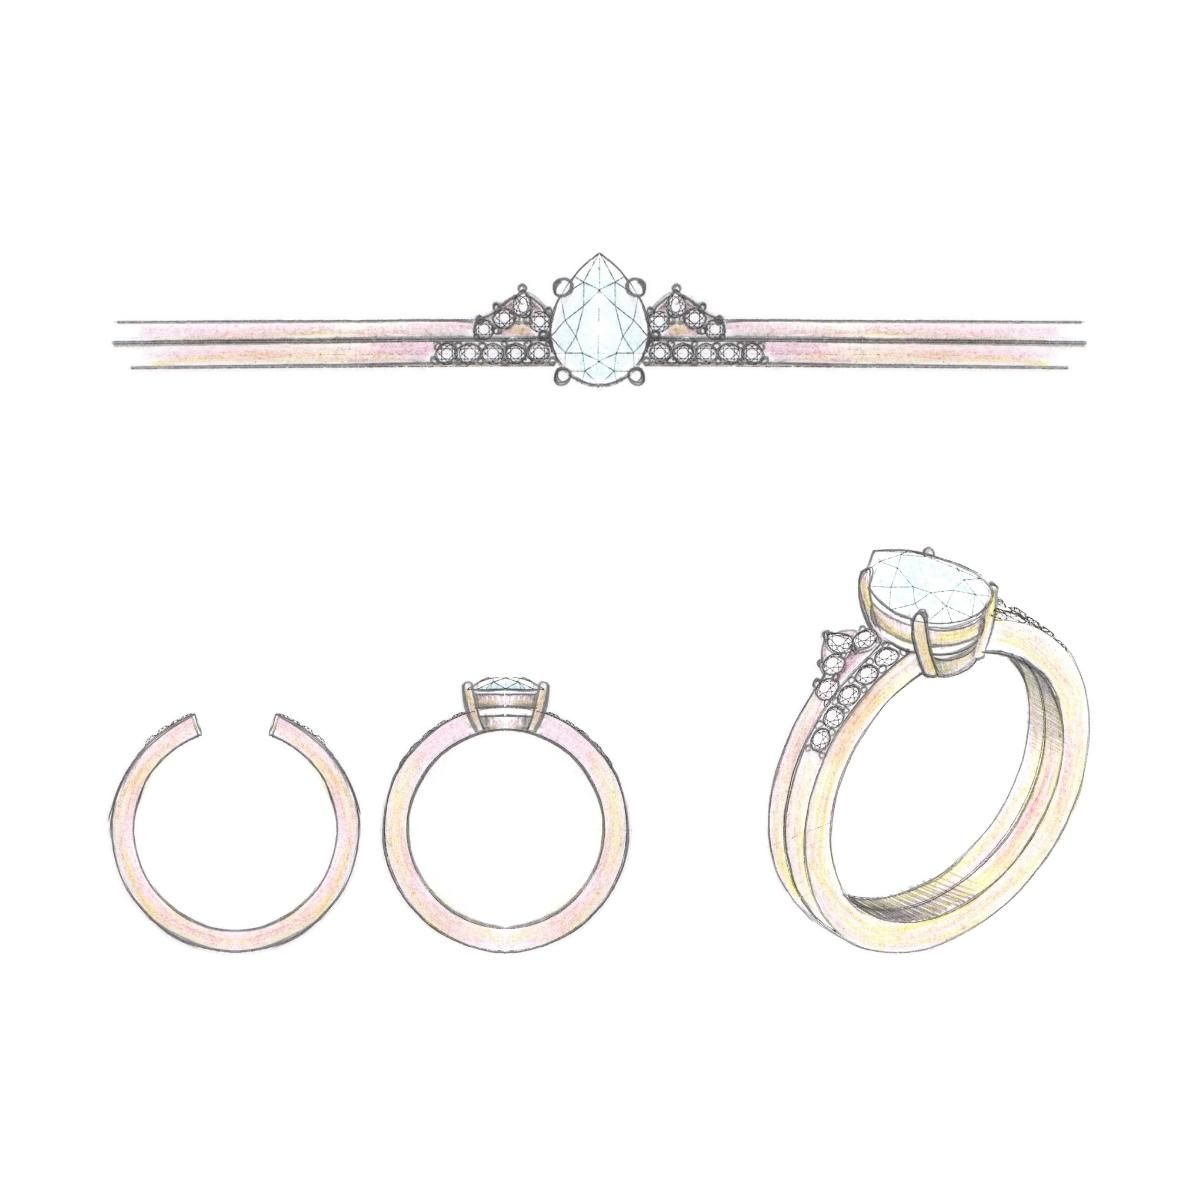 Mountain engagement ring designs | CustomMade.com